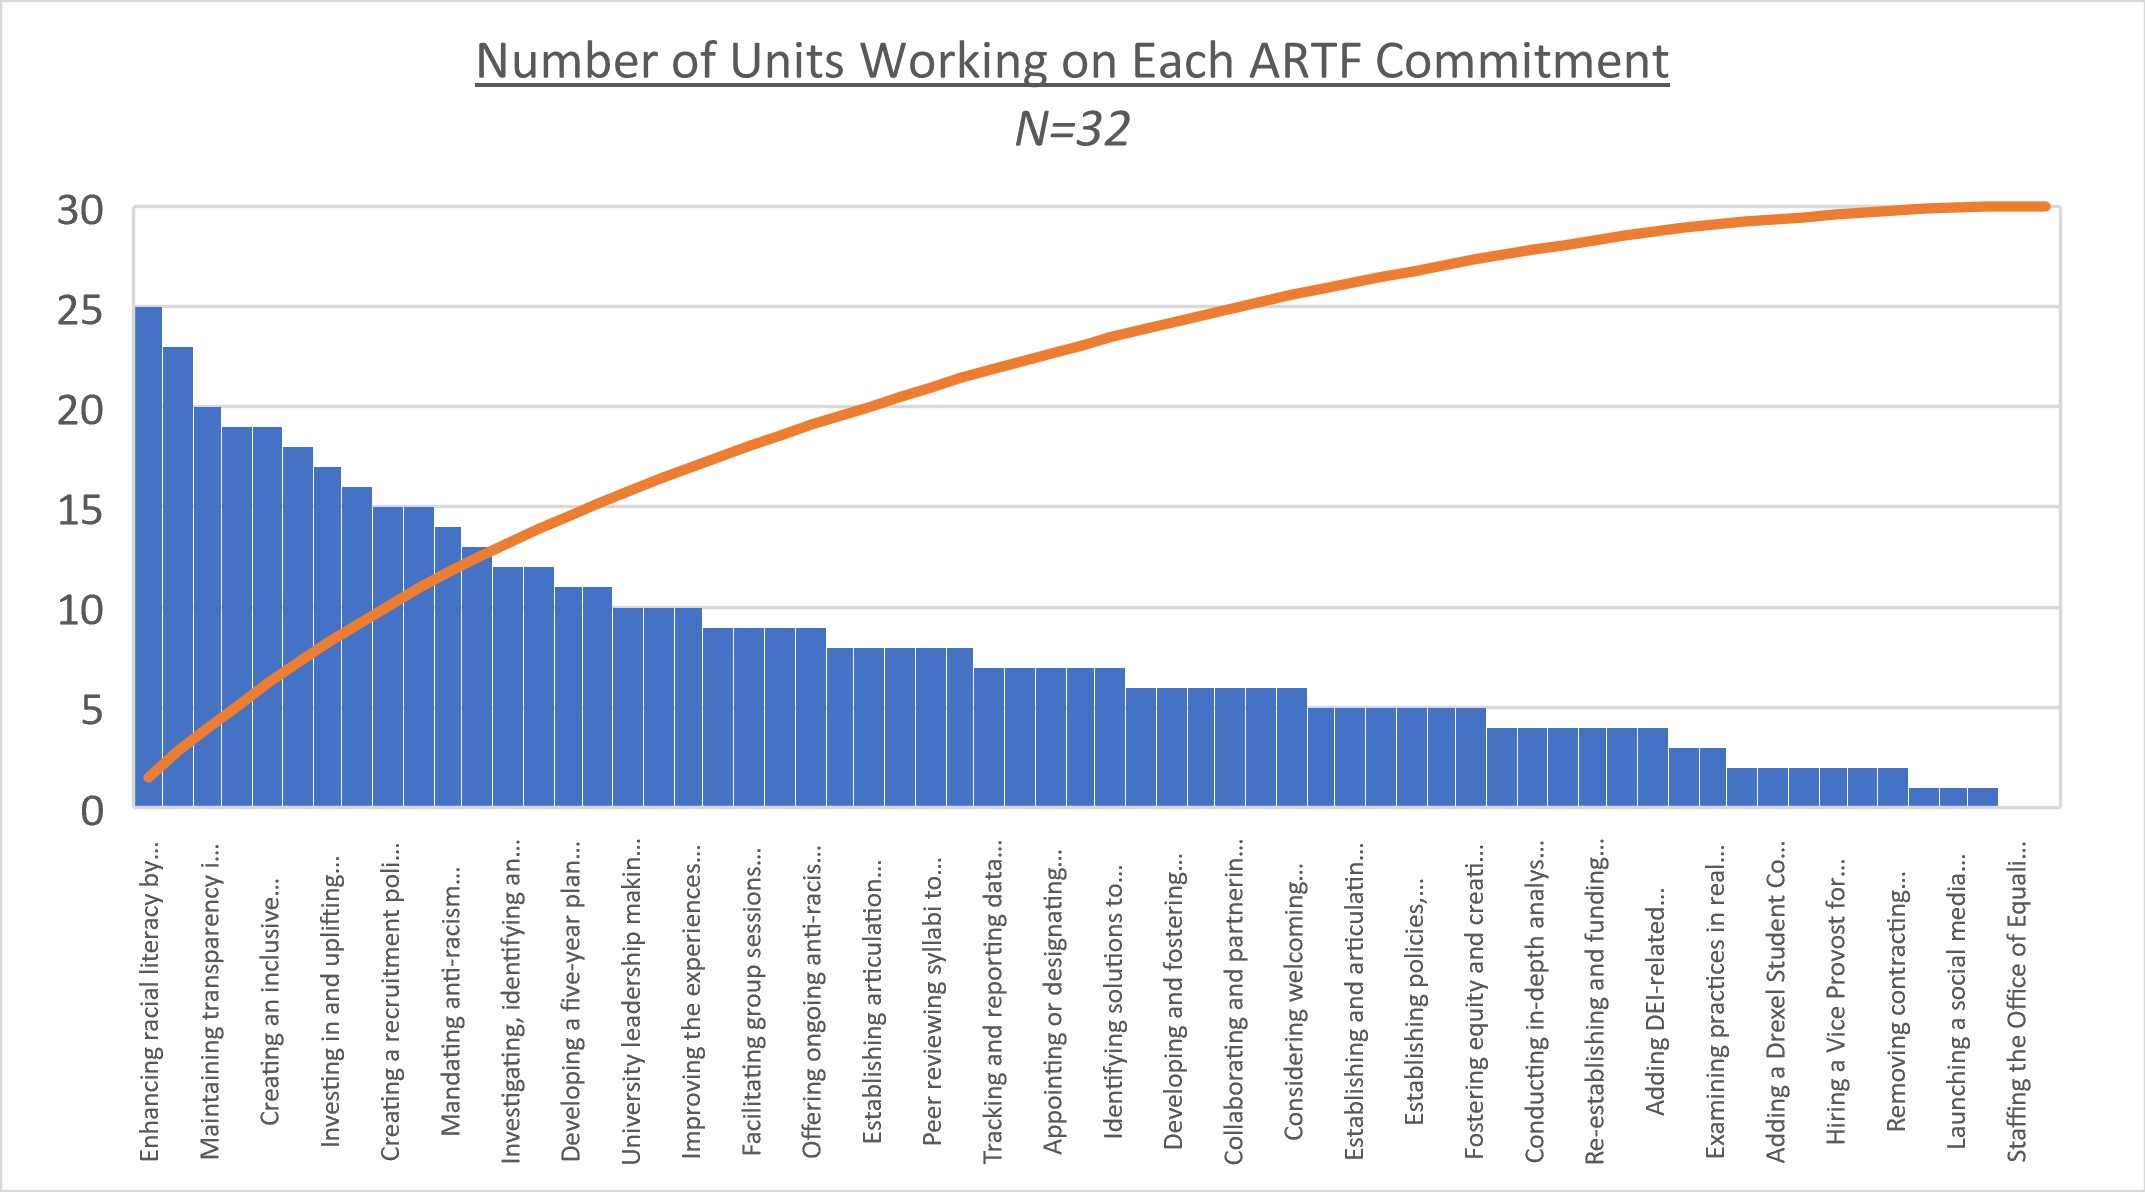 Figure 6: ARTF Commitments with Aggregated Unit Responses